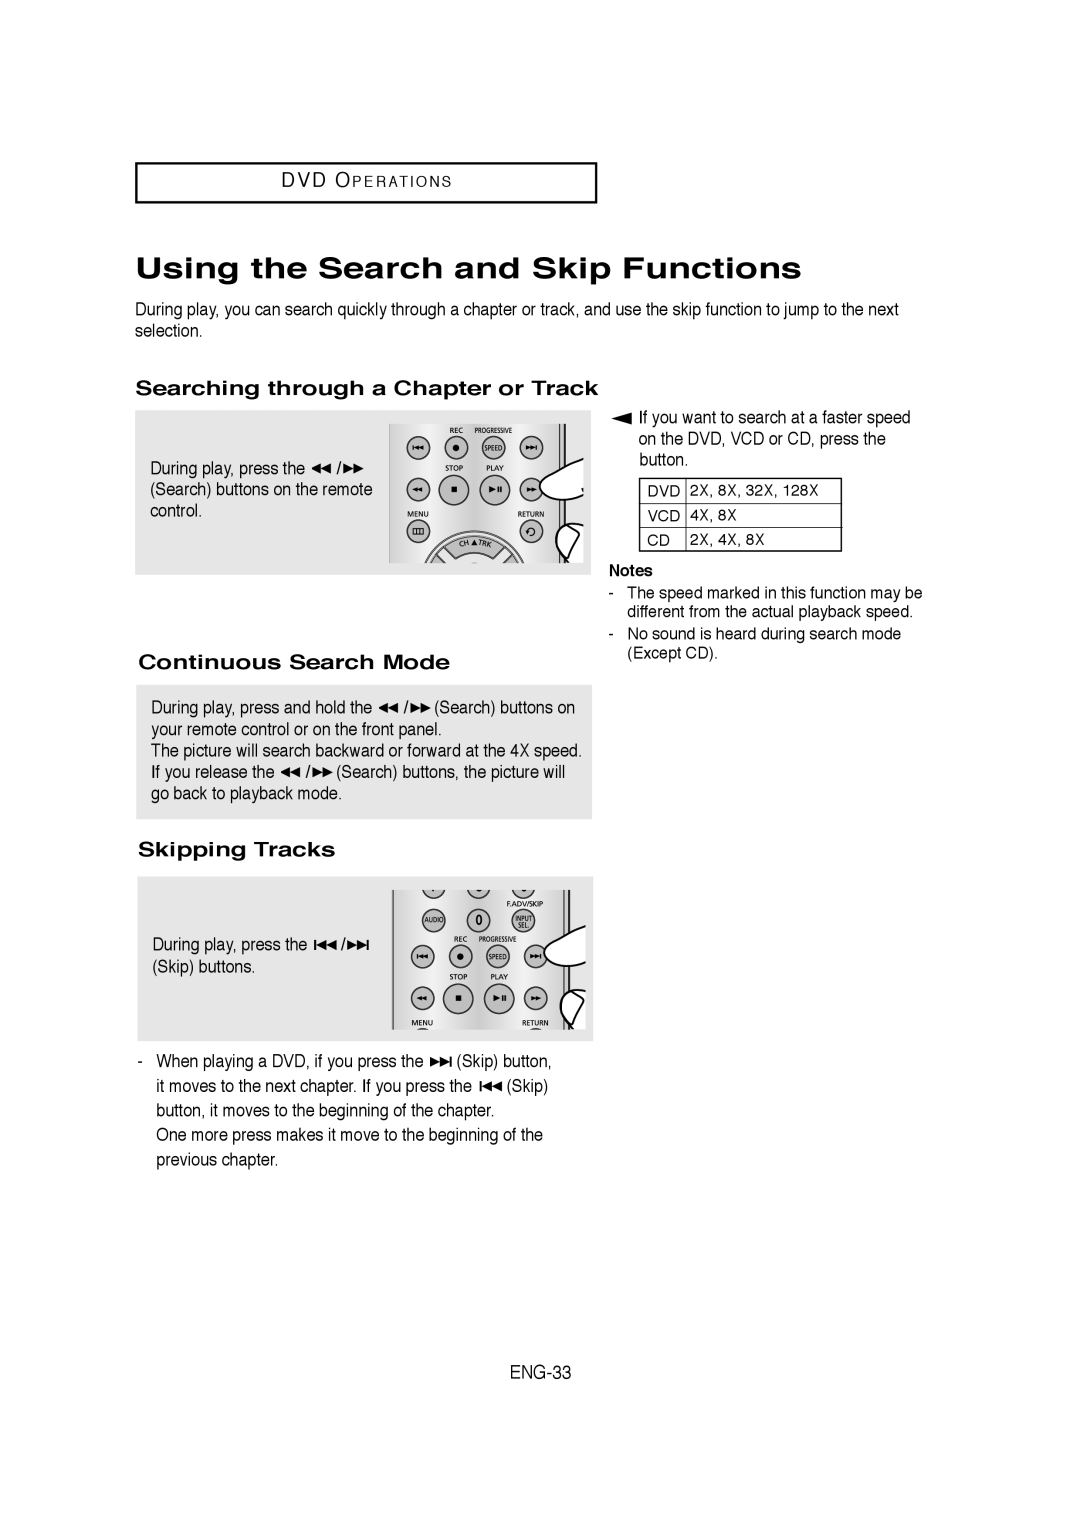 Samsung AK68-01304A Using the Search and Skip Functions, Searching through a Chapter or Track, Continuous Search Mode 